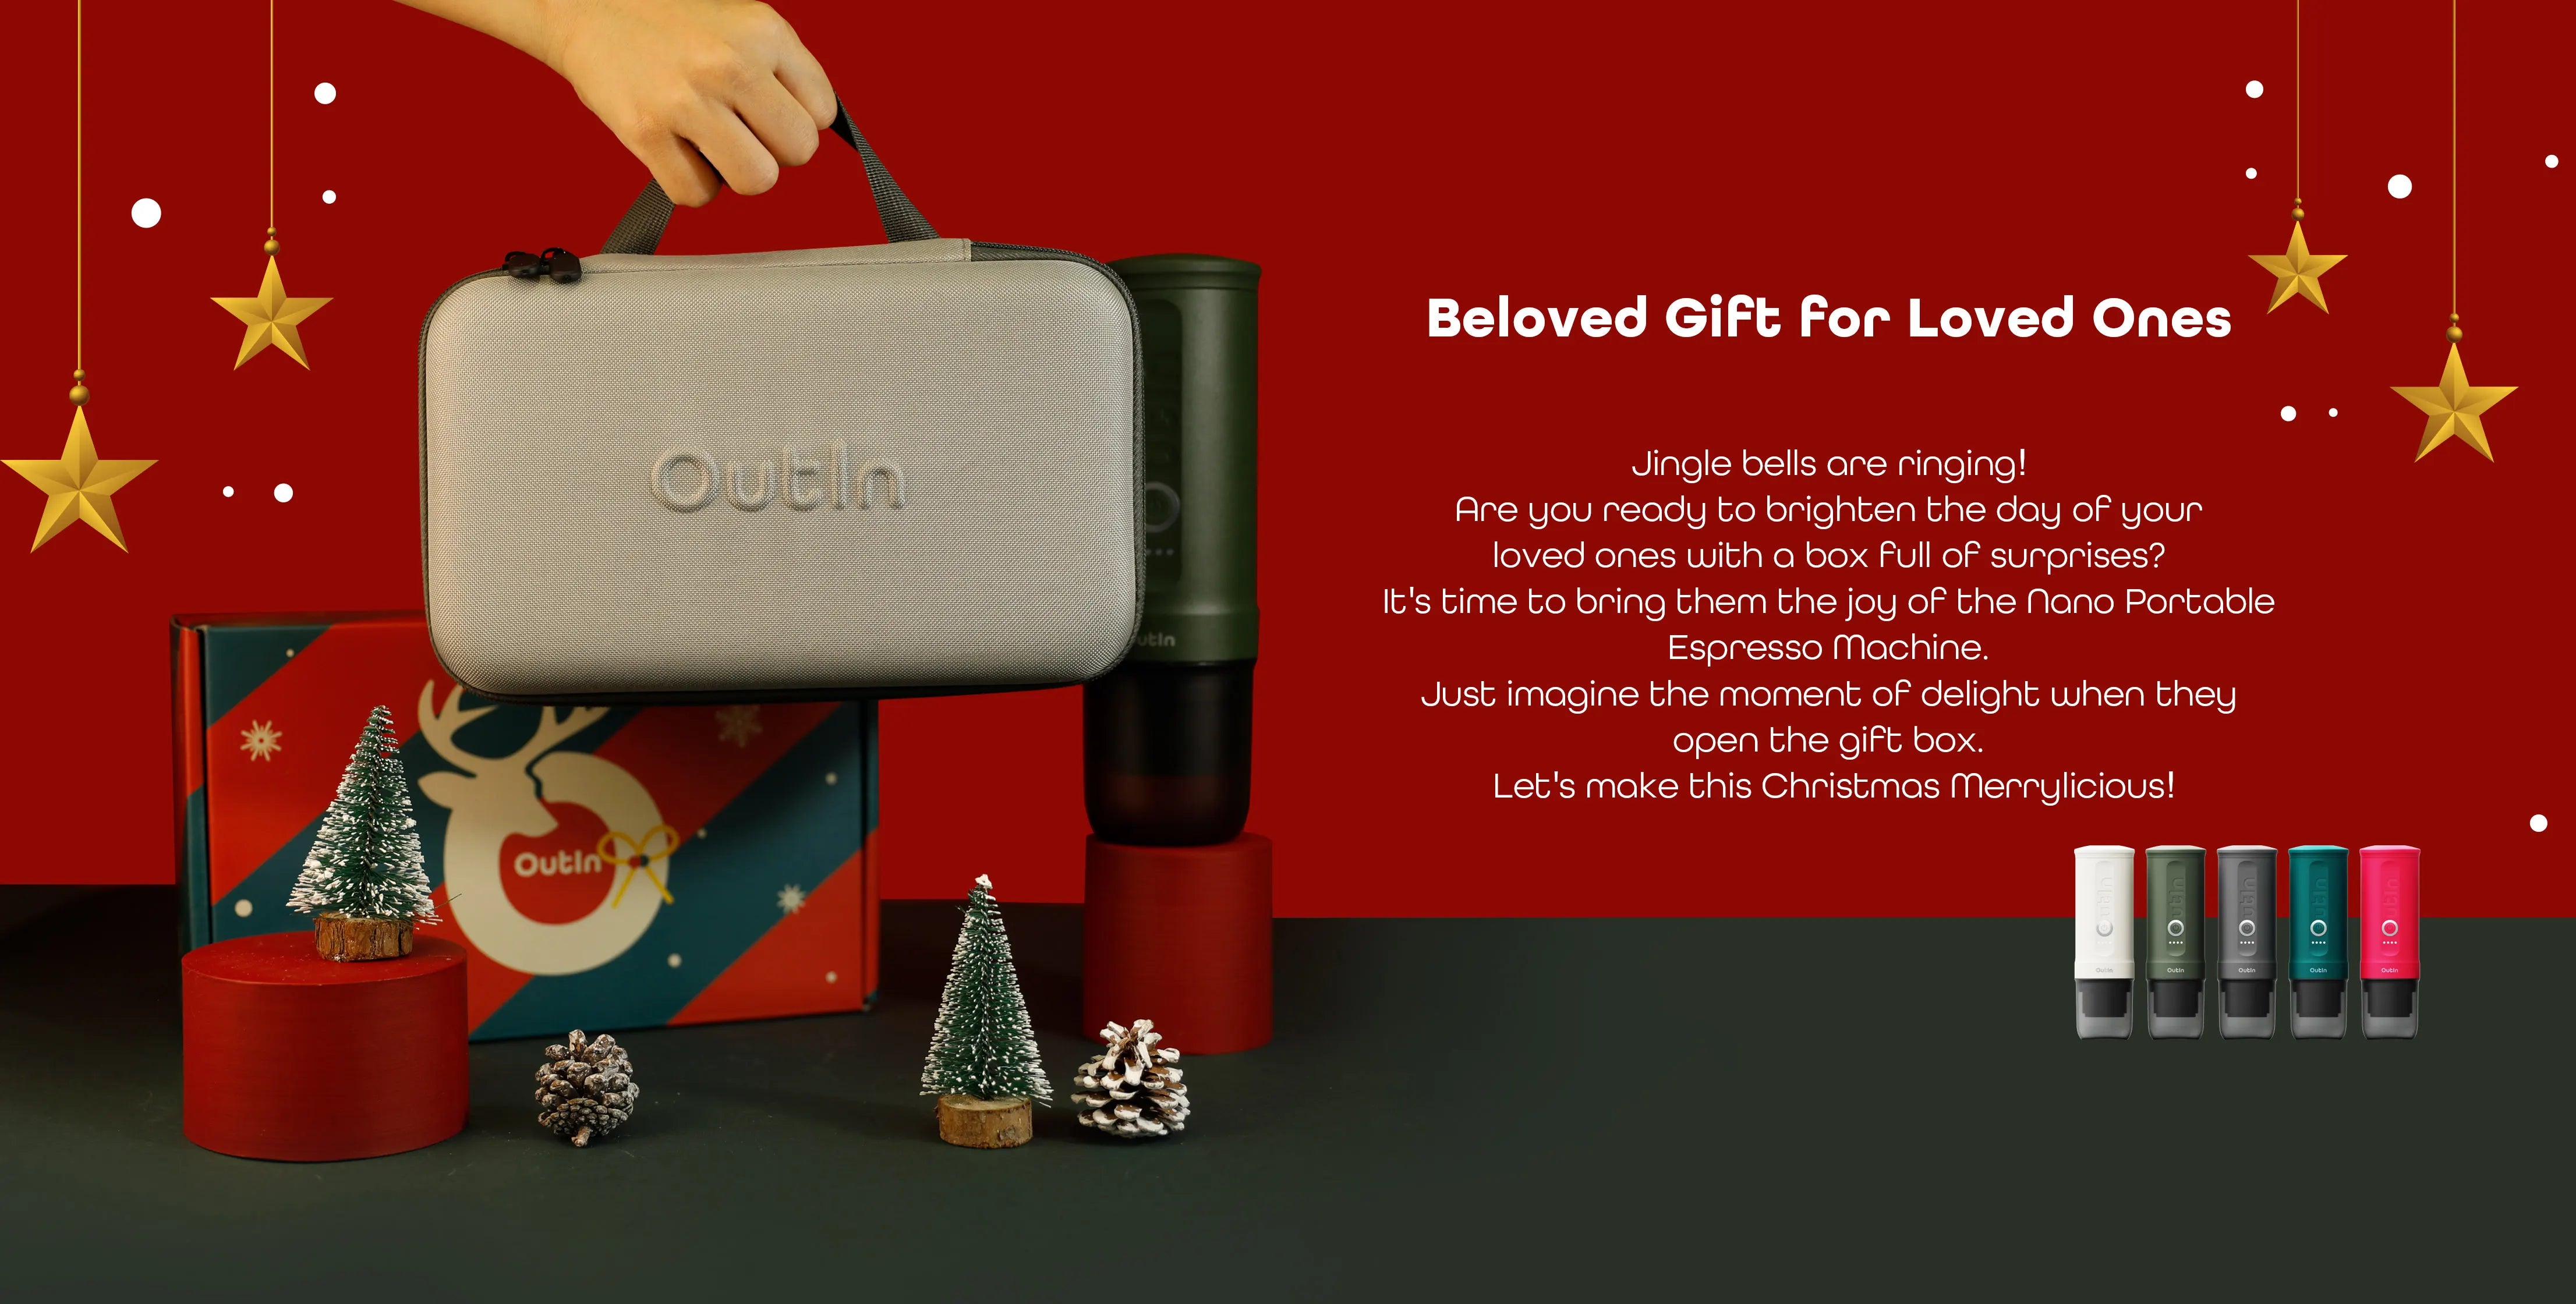 Beloved Gift for Loved Ones             Jingle bells are ringing! Are you ready to brighten the day of your loved ones with a box full of surprises? It's time to bring them the joy of the Nano Portable Espresso Machine. Just imagine the moment of delight when they open the gift box. Let's make this Christmas Merrylicious!